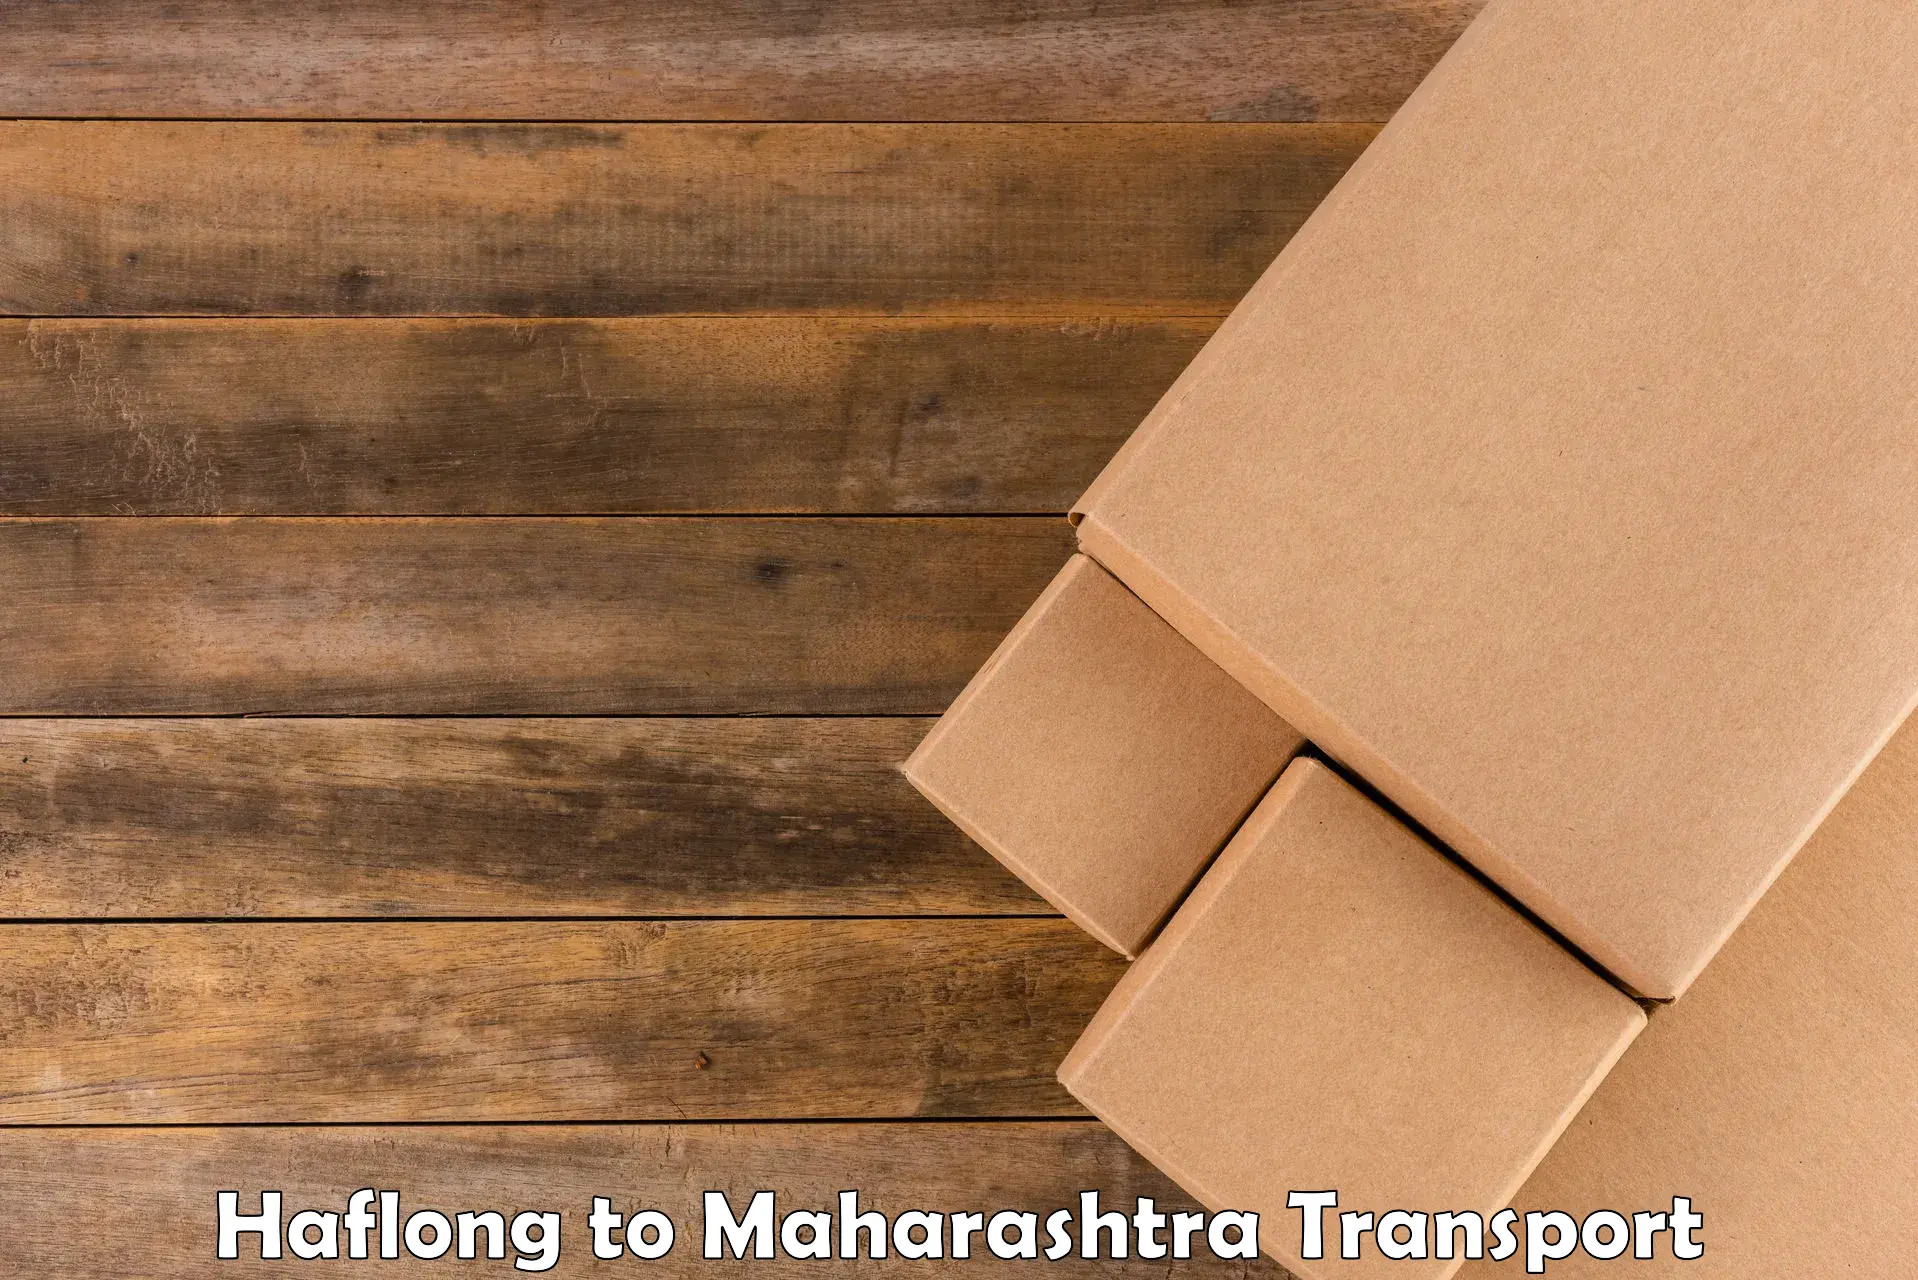 Air freight transport services Haflong to Chandrapur